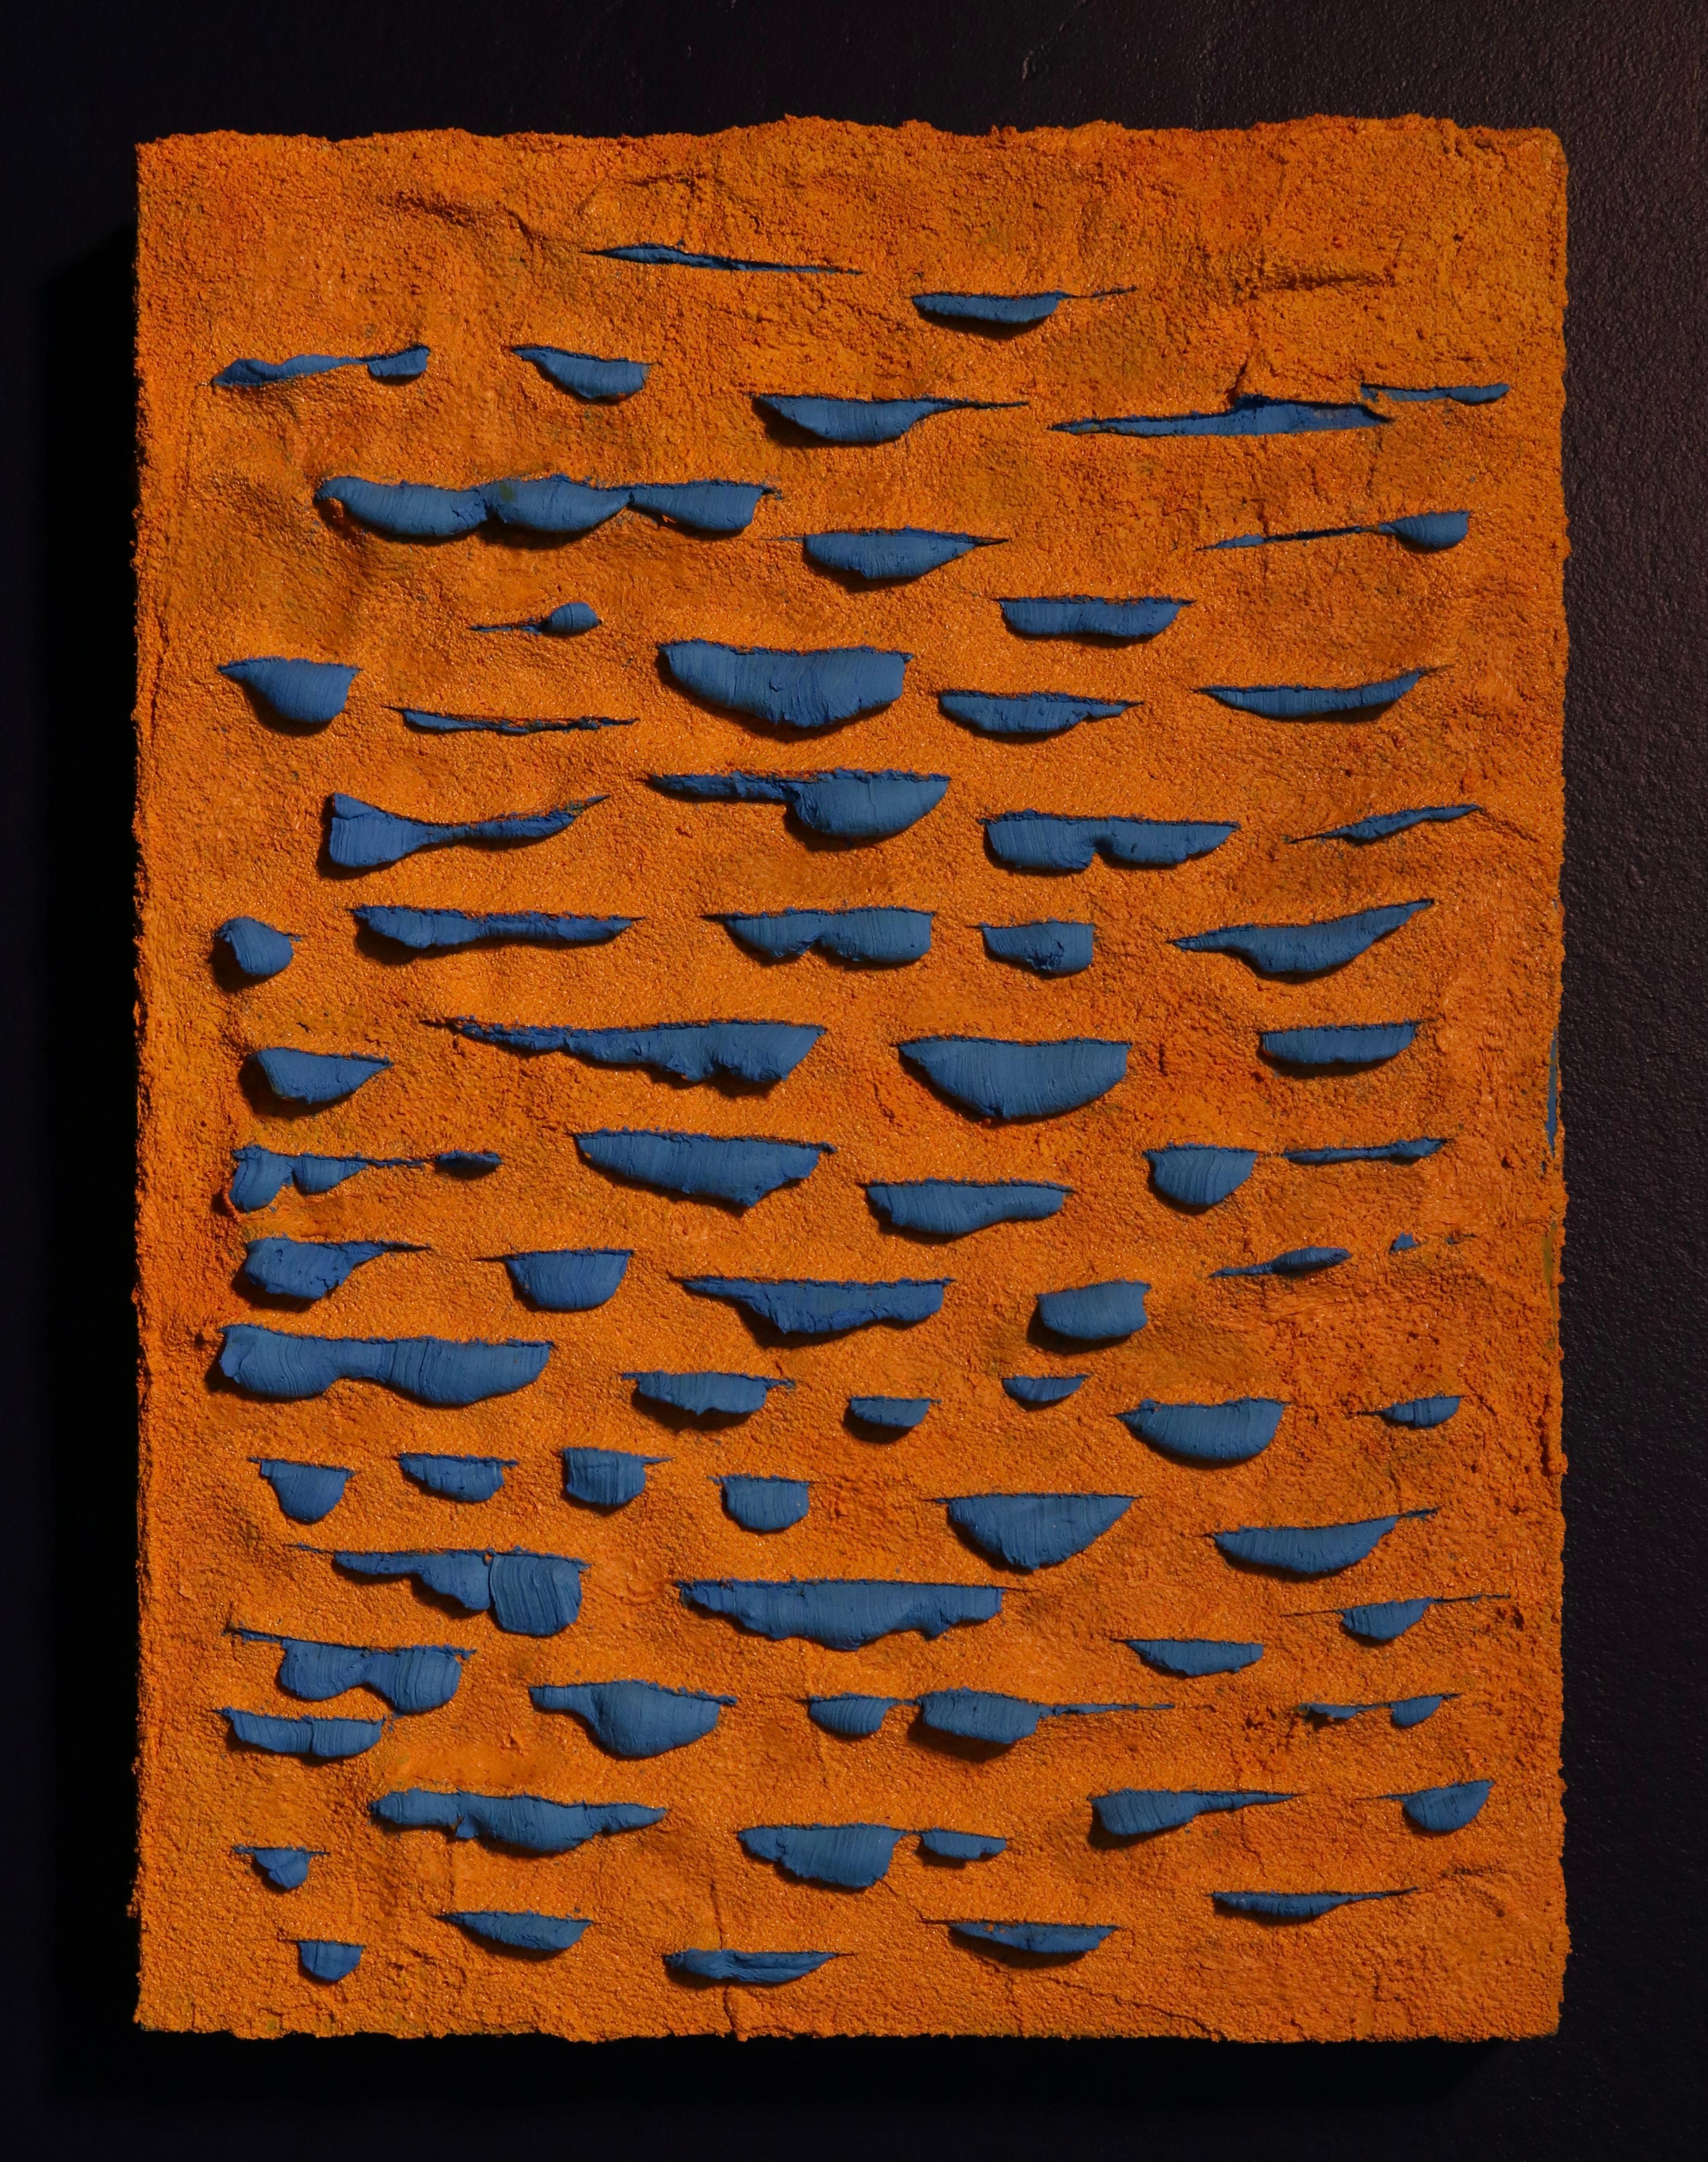 Orange and Blue Ooze (Lucio Fontana slash oil painting abstract contemporary art - Mixed Media Art by Lucas Biagini